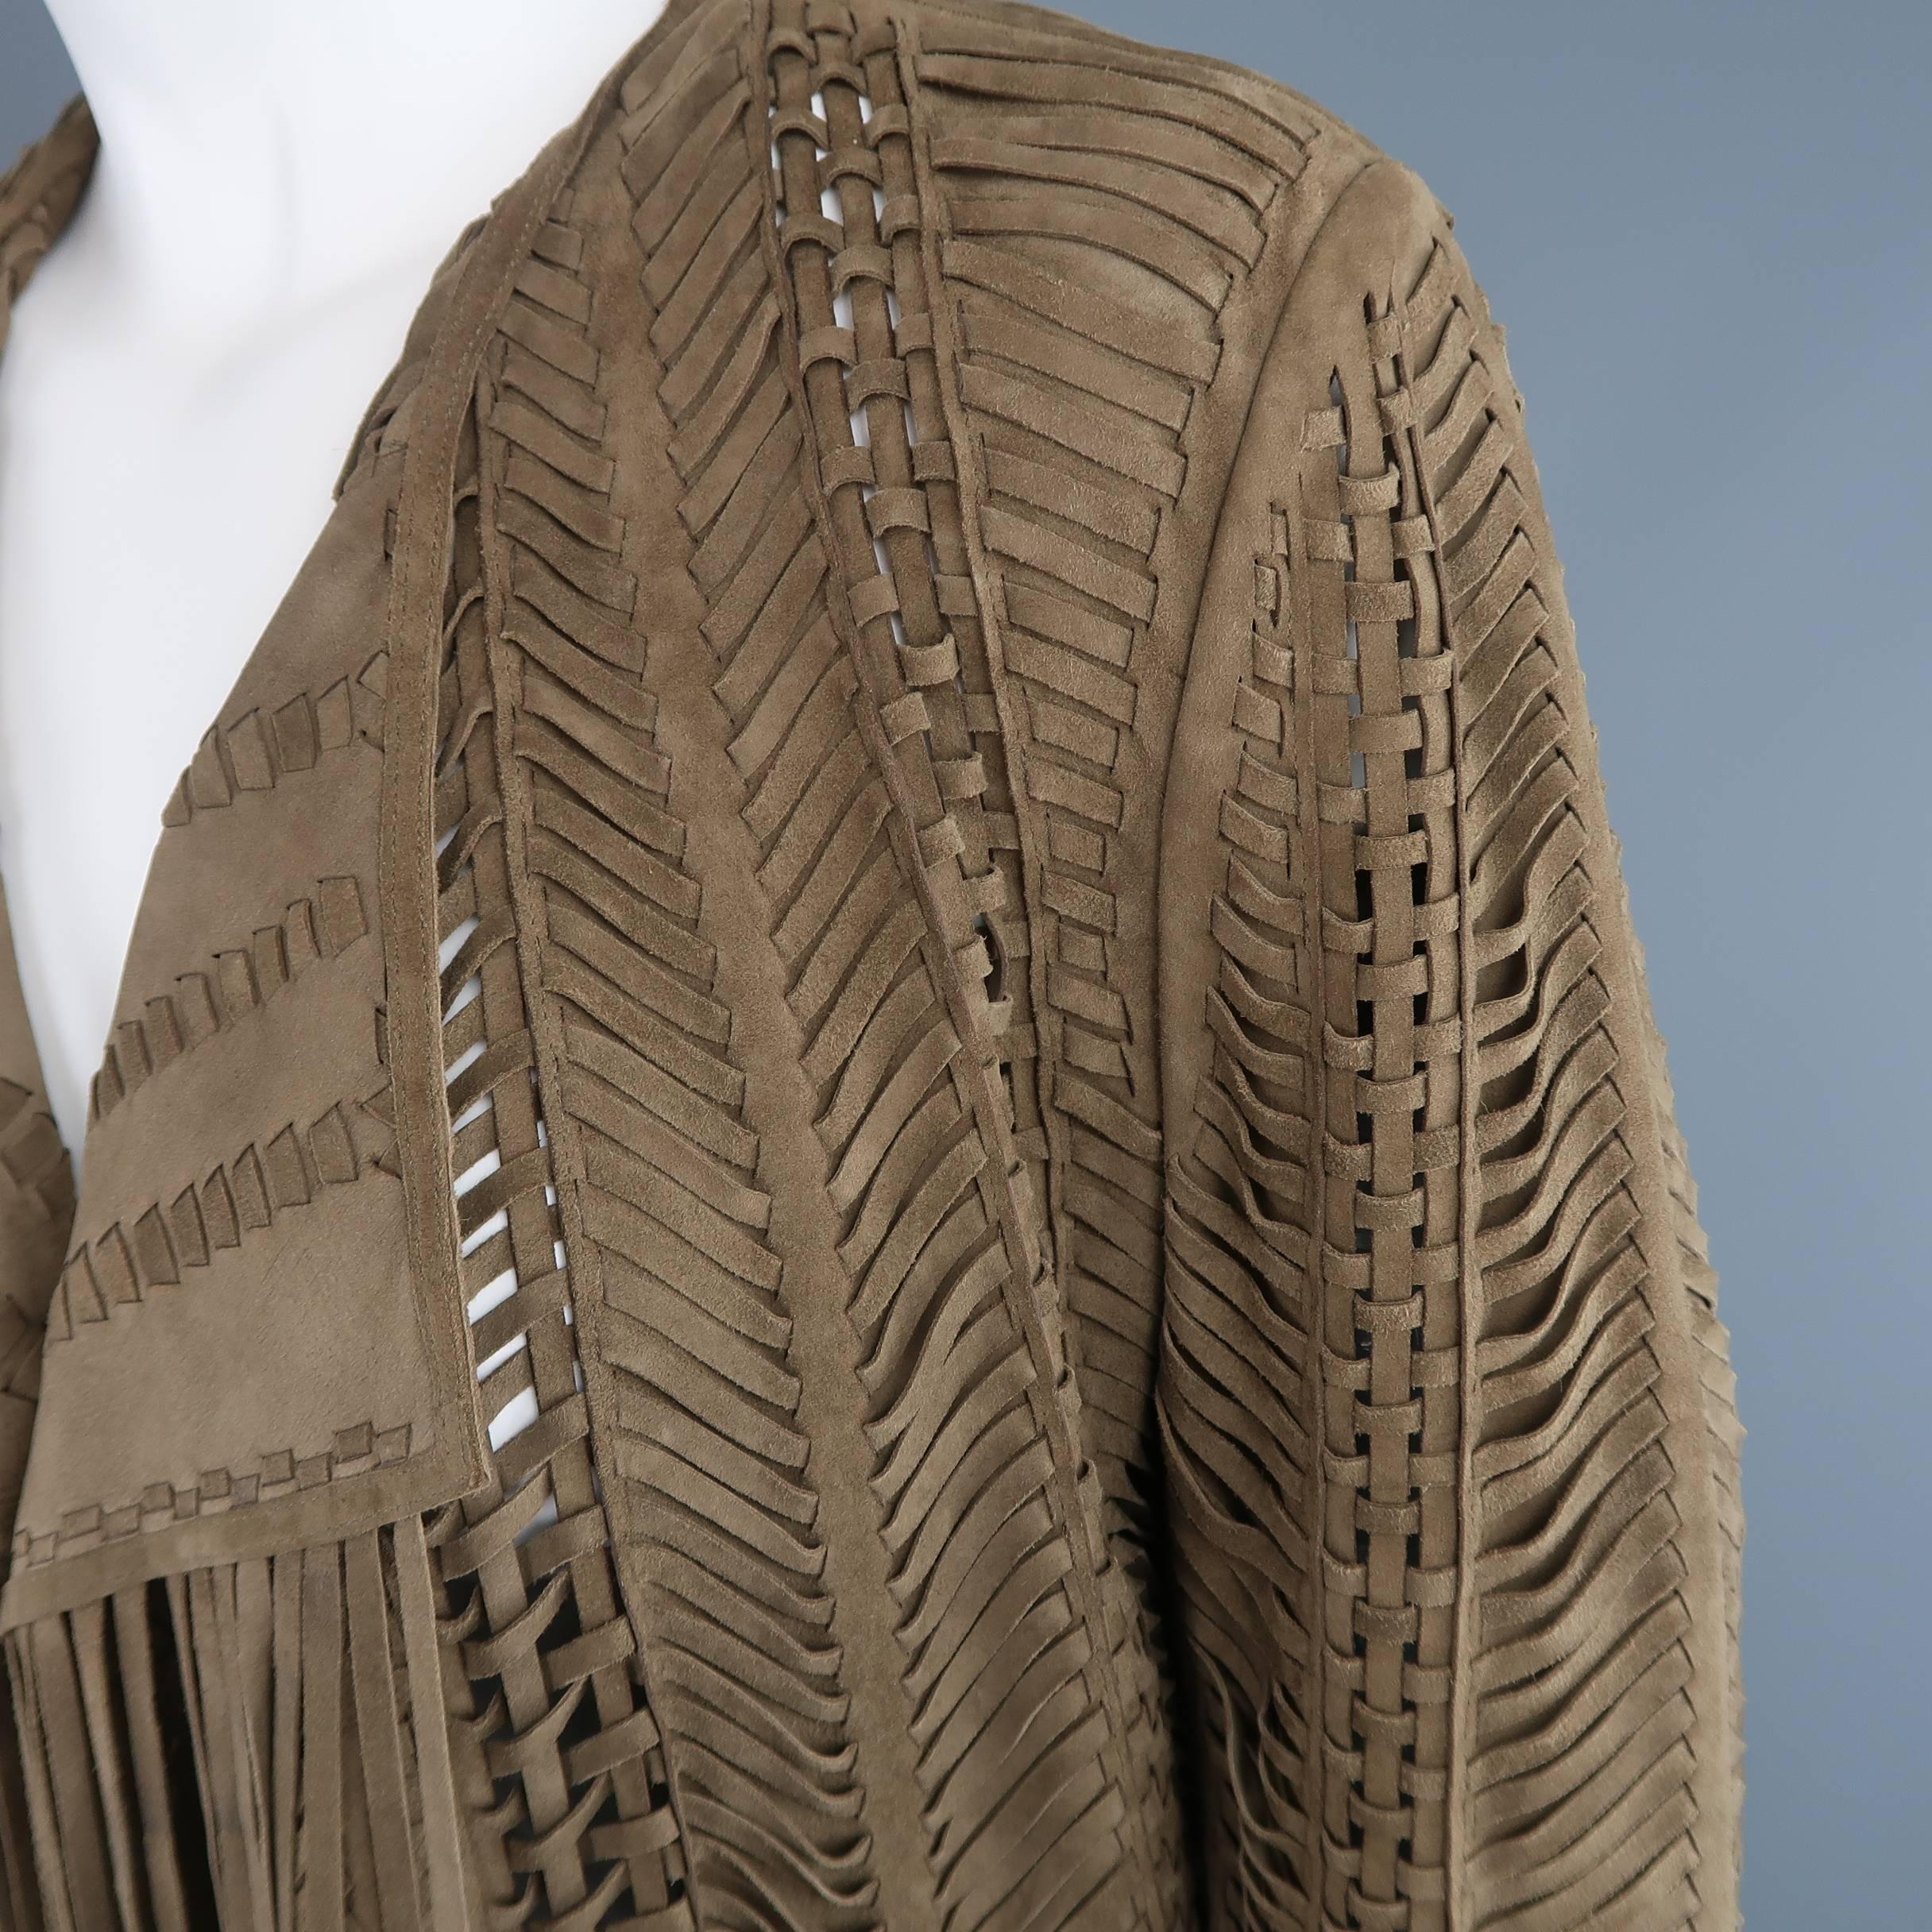 RALPH LAUREN COLLECTION Size 6 Olive Taupe Woven Fringe Jacket - Retail $4500 In Excellent Condition In San Francisco, CA